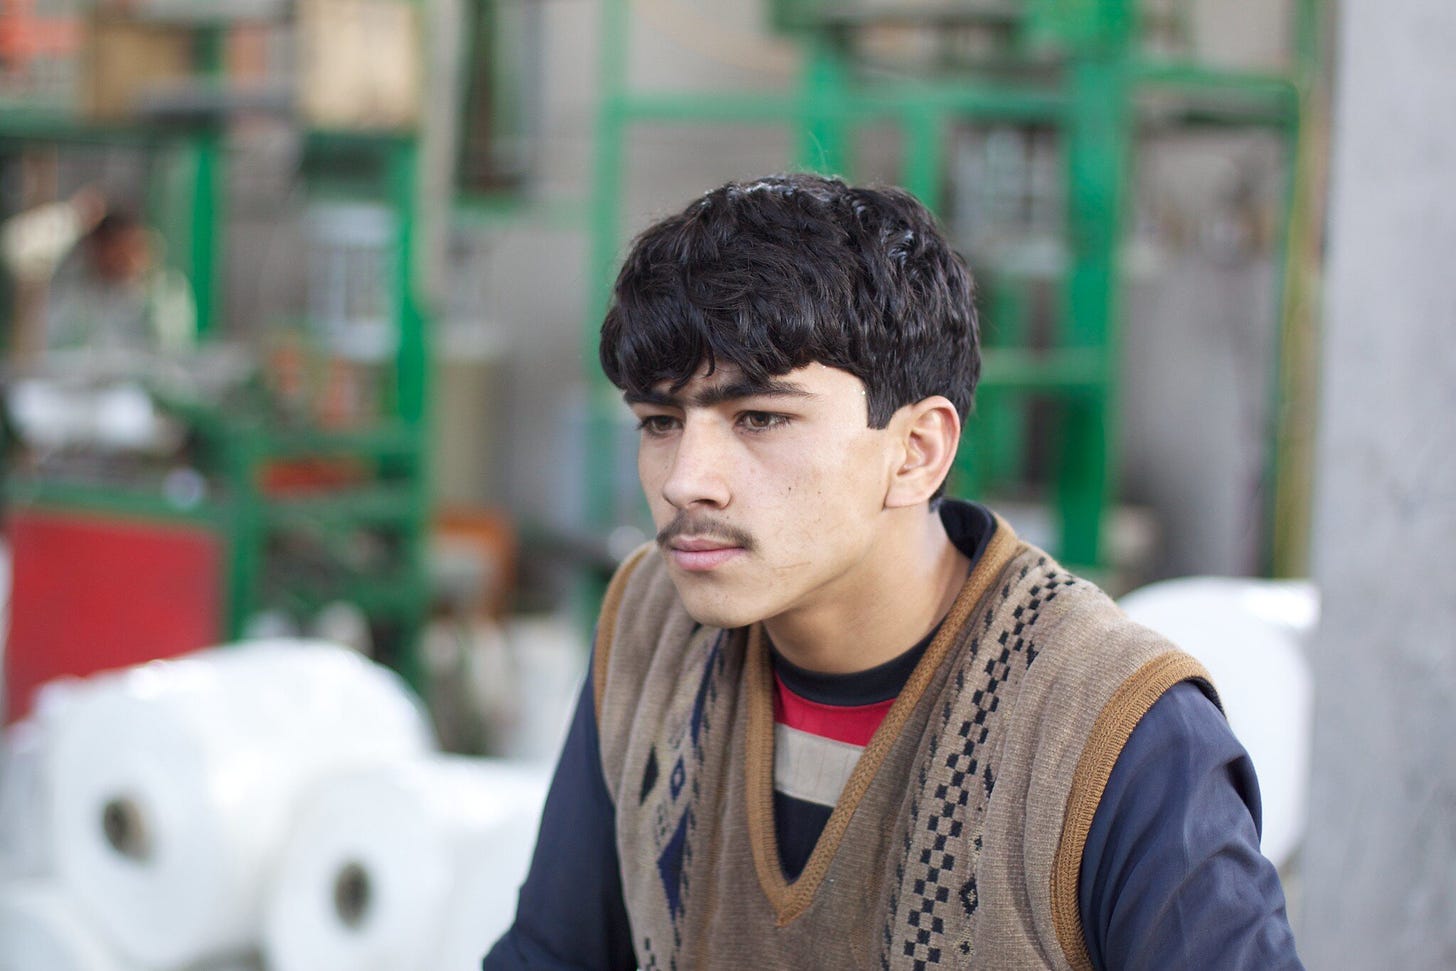 An  Afghan youth. About 64% of Afghans are under age 25, according to the UNFDP. Creative Commons photo by Todd Huffman.